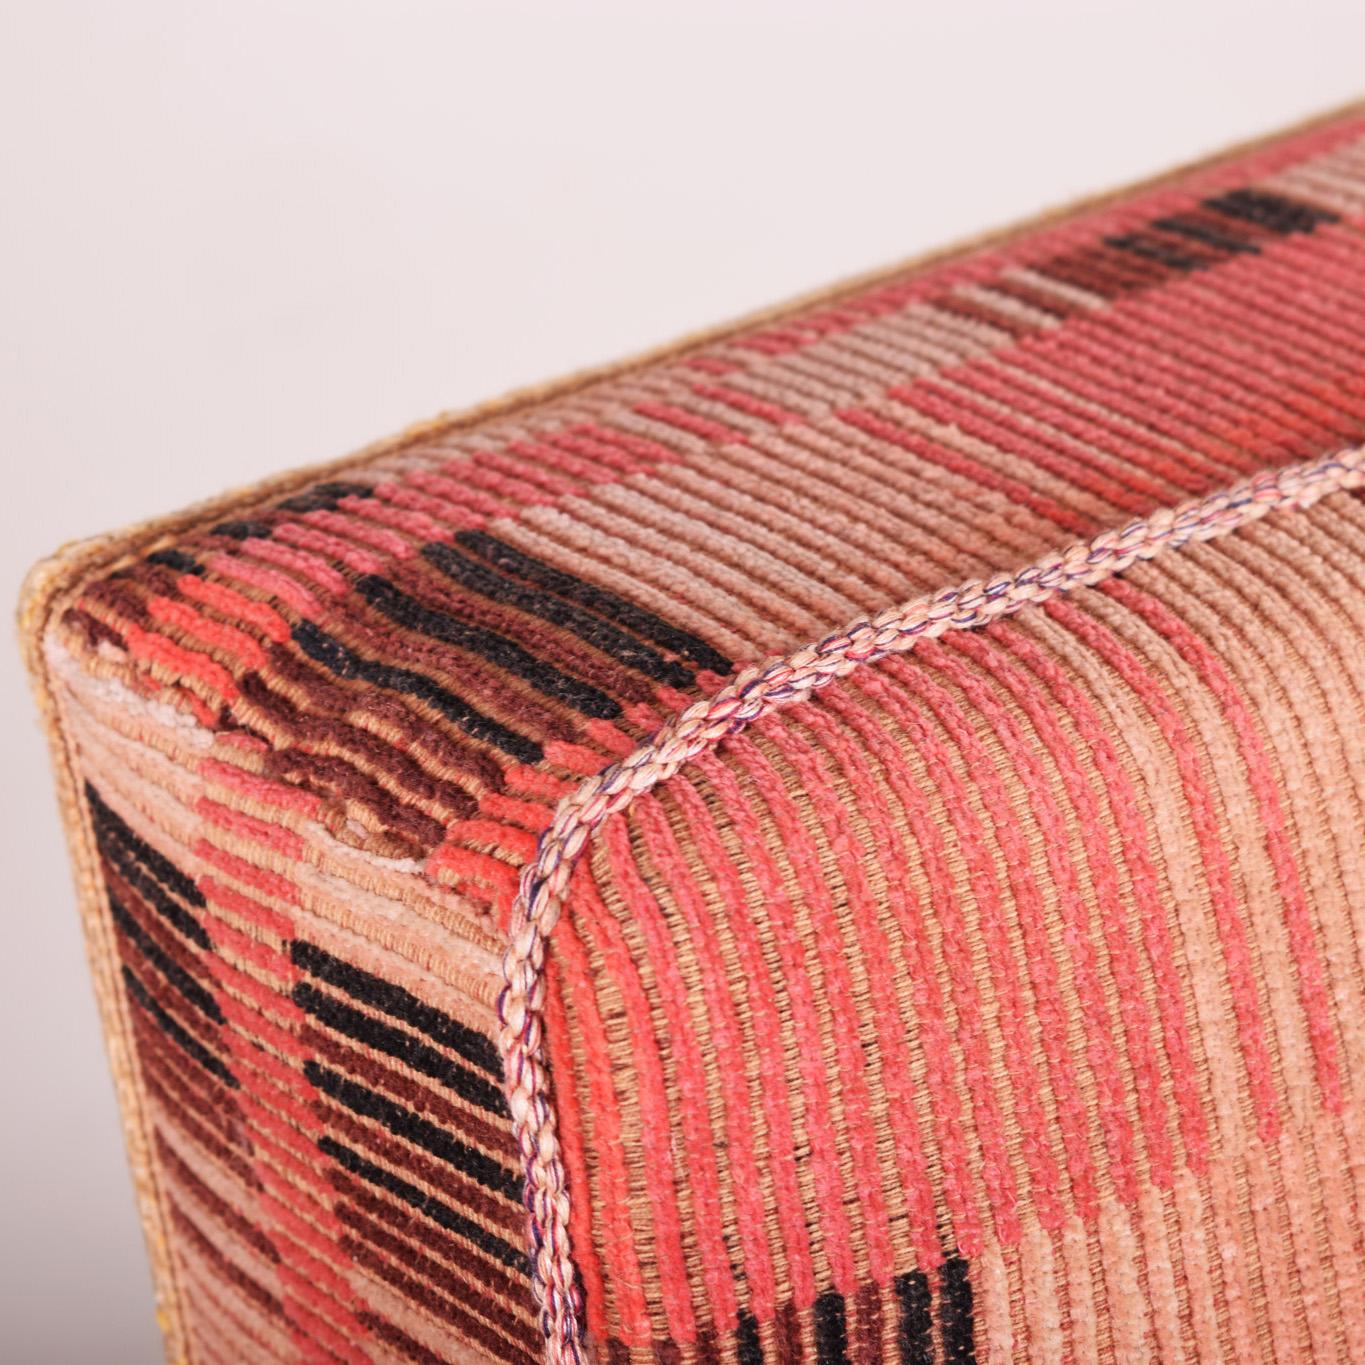 Pink Art Deco Armchair, Made in 1930s Czechia and Restored, Original Fabric For Sale 4